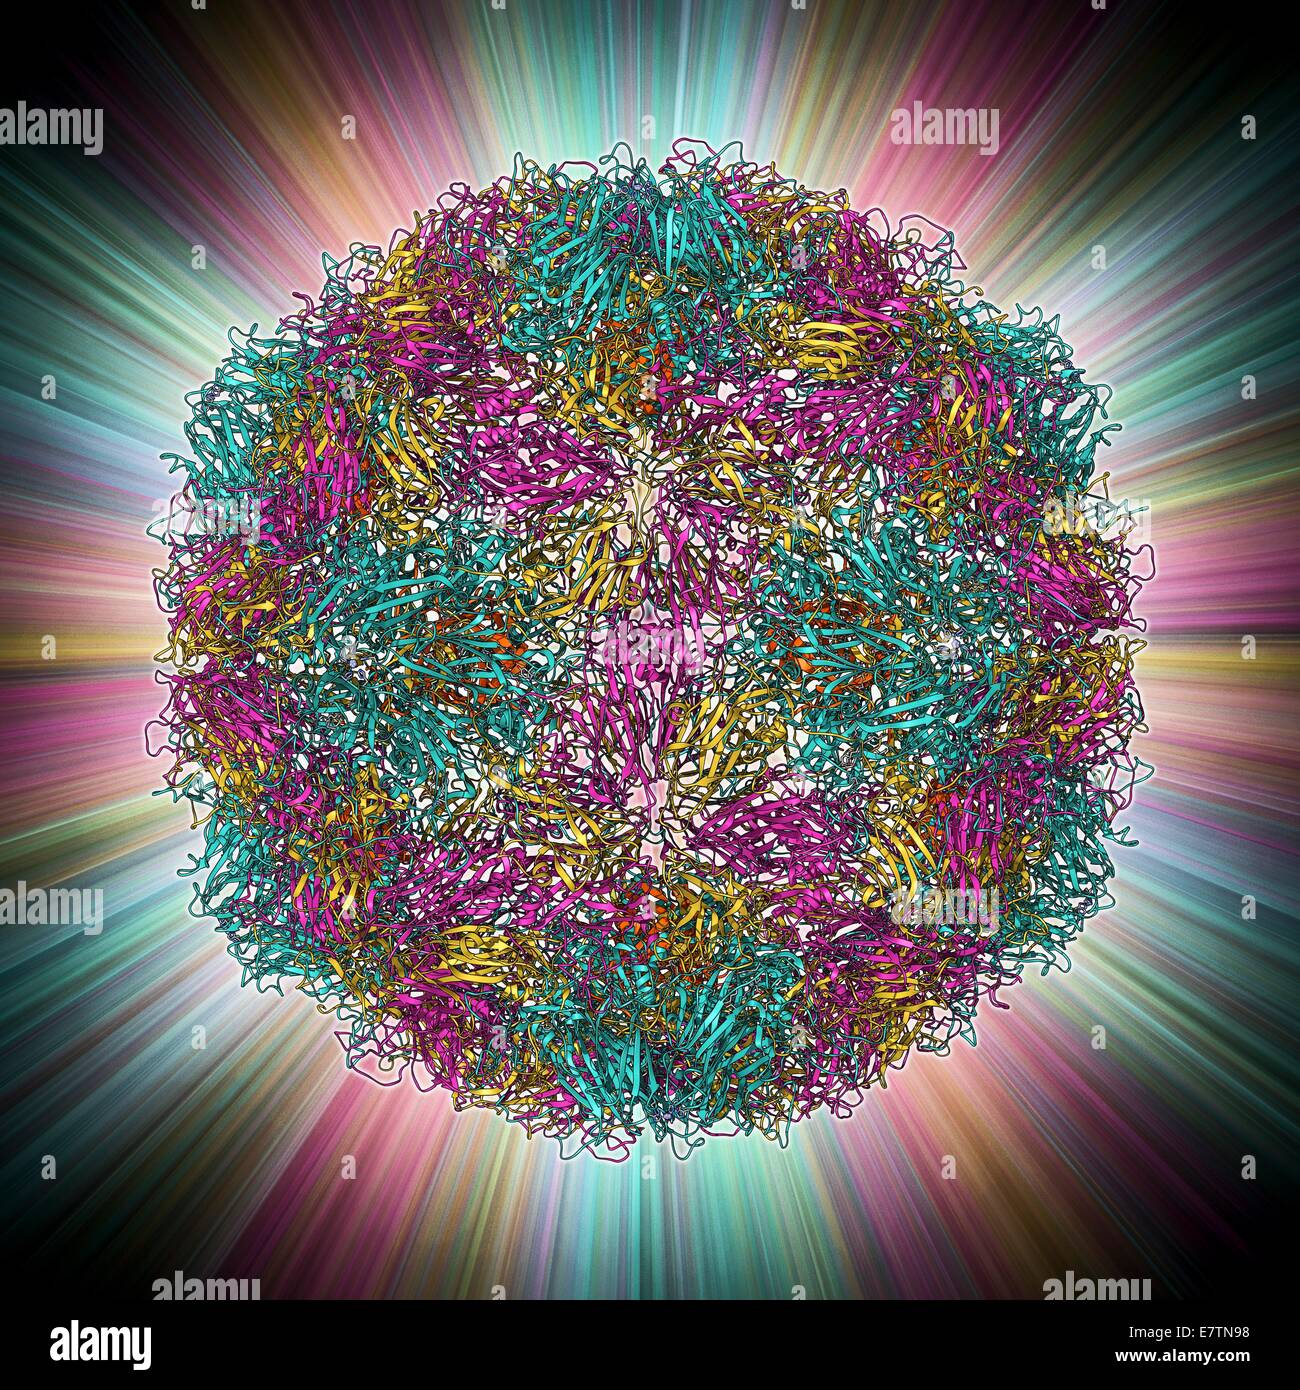 Rhinovirus 16 capsid, molecular model. This is human rhinovirus 16. The rhinovirus infects the upper respiratory tract and is the cause of the common cold. It is spread by coughs and sneezes. In viruses, the capsid is the protein shell that encloses the g Stock Photo